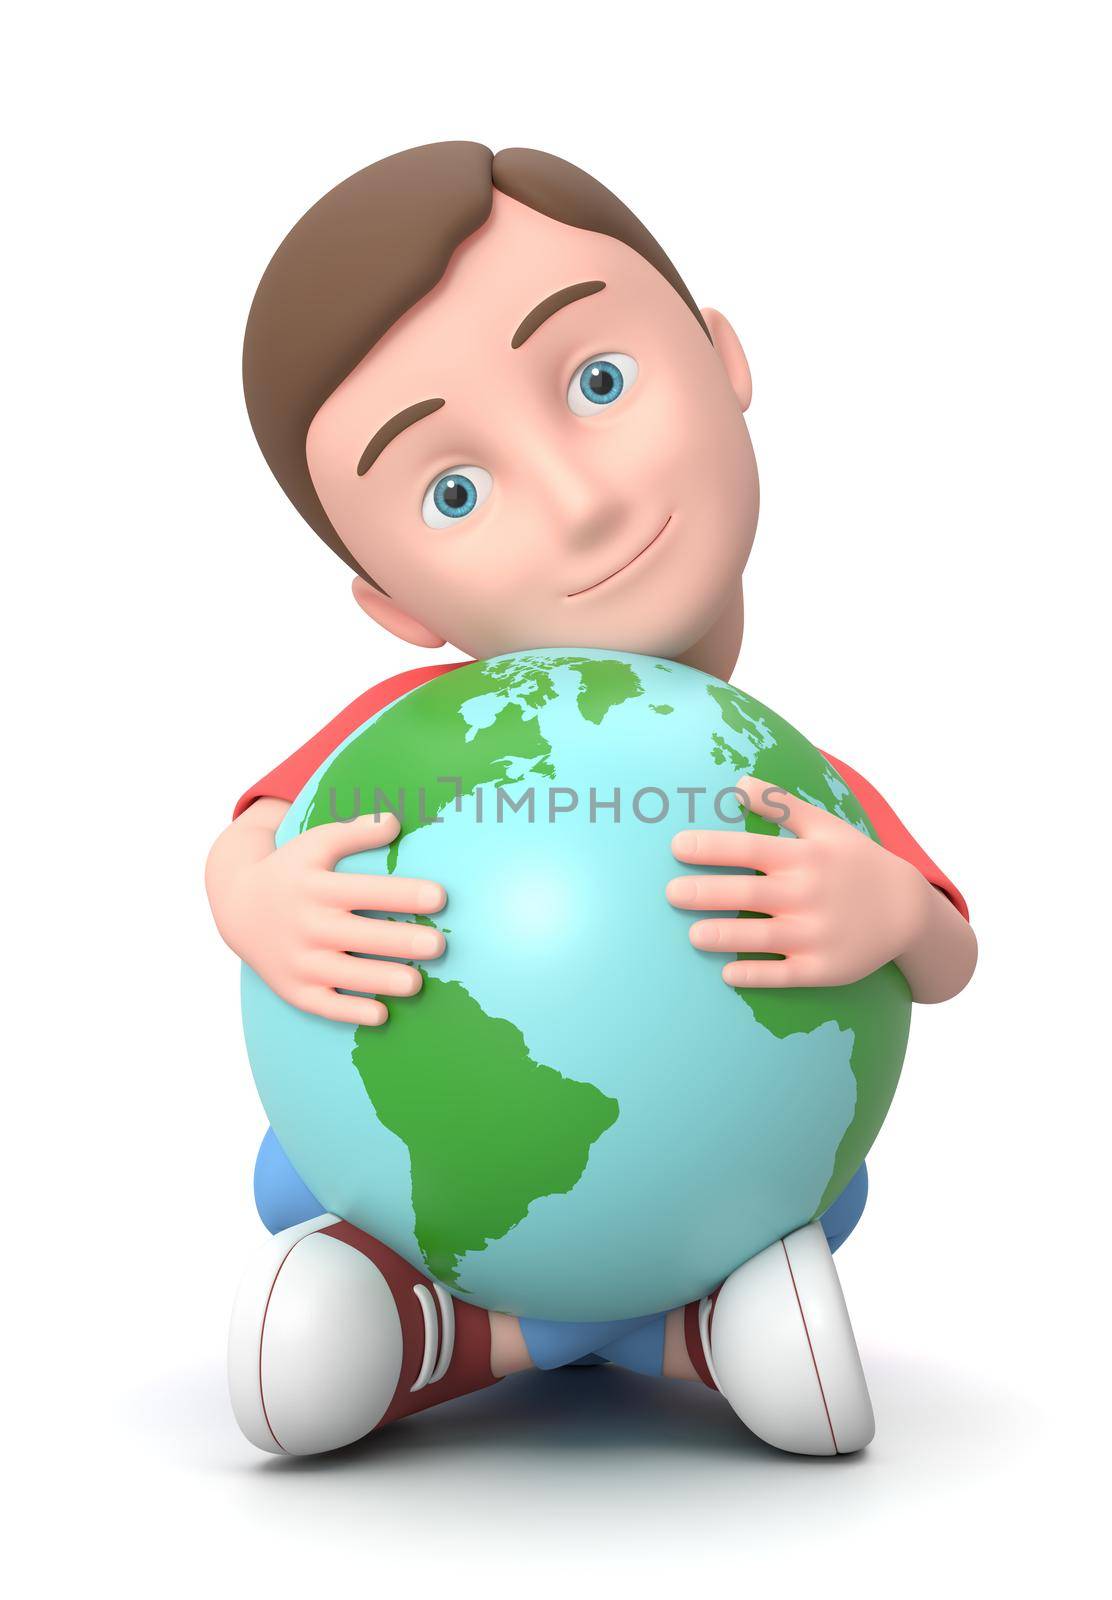 Smiling Young Kid Cuddling the World. 3D Cartoon Character Sitting on the Ground Isolated on White Background 3D Illustration, Love the Earth Concept